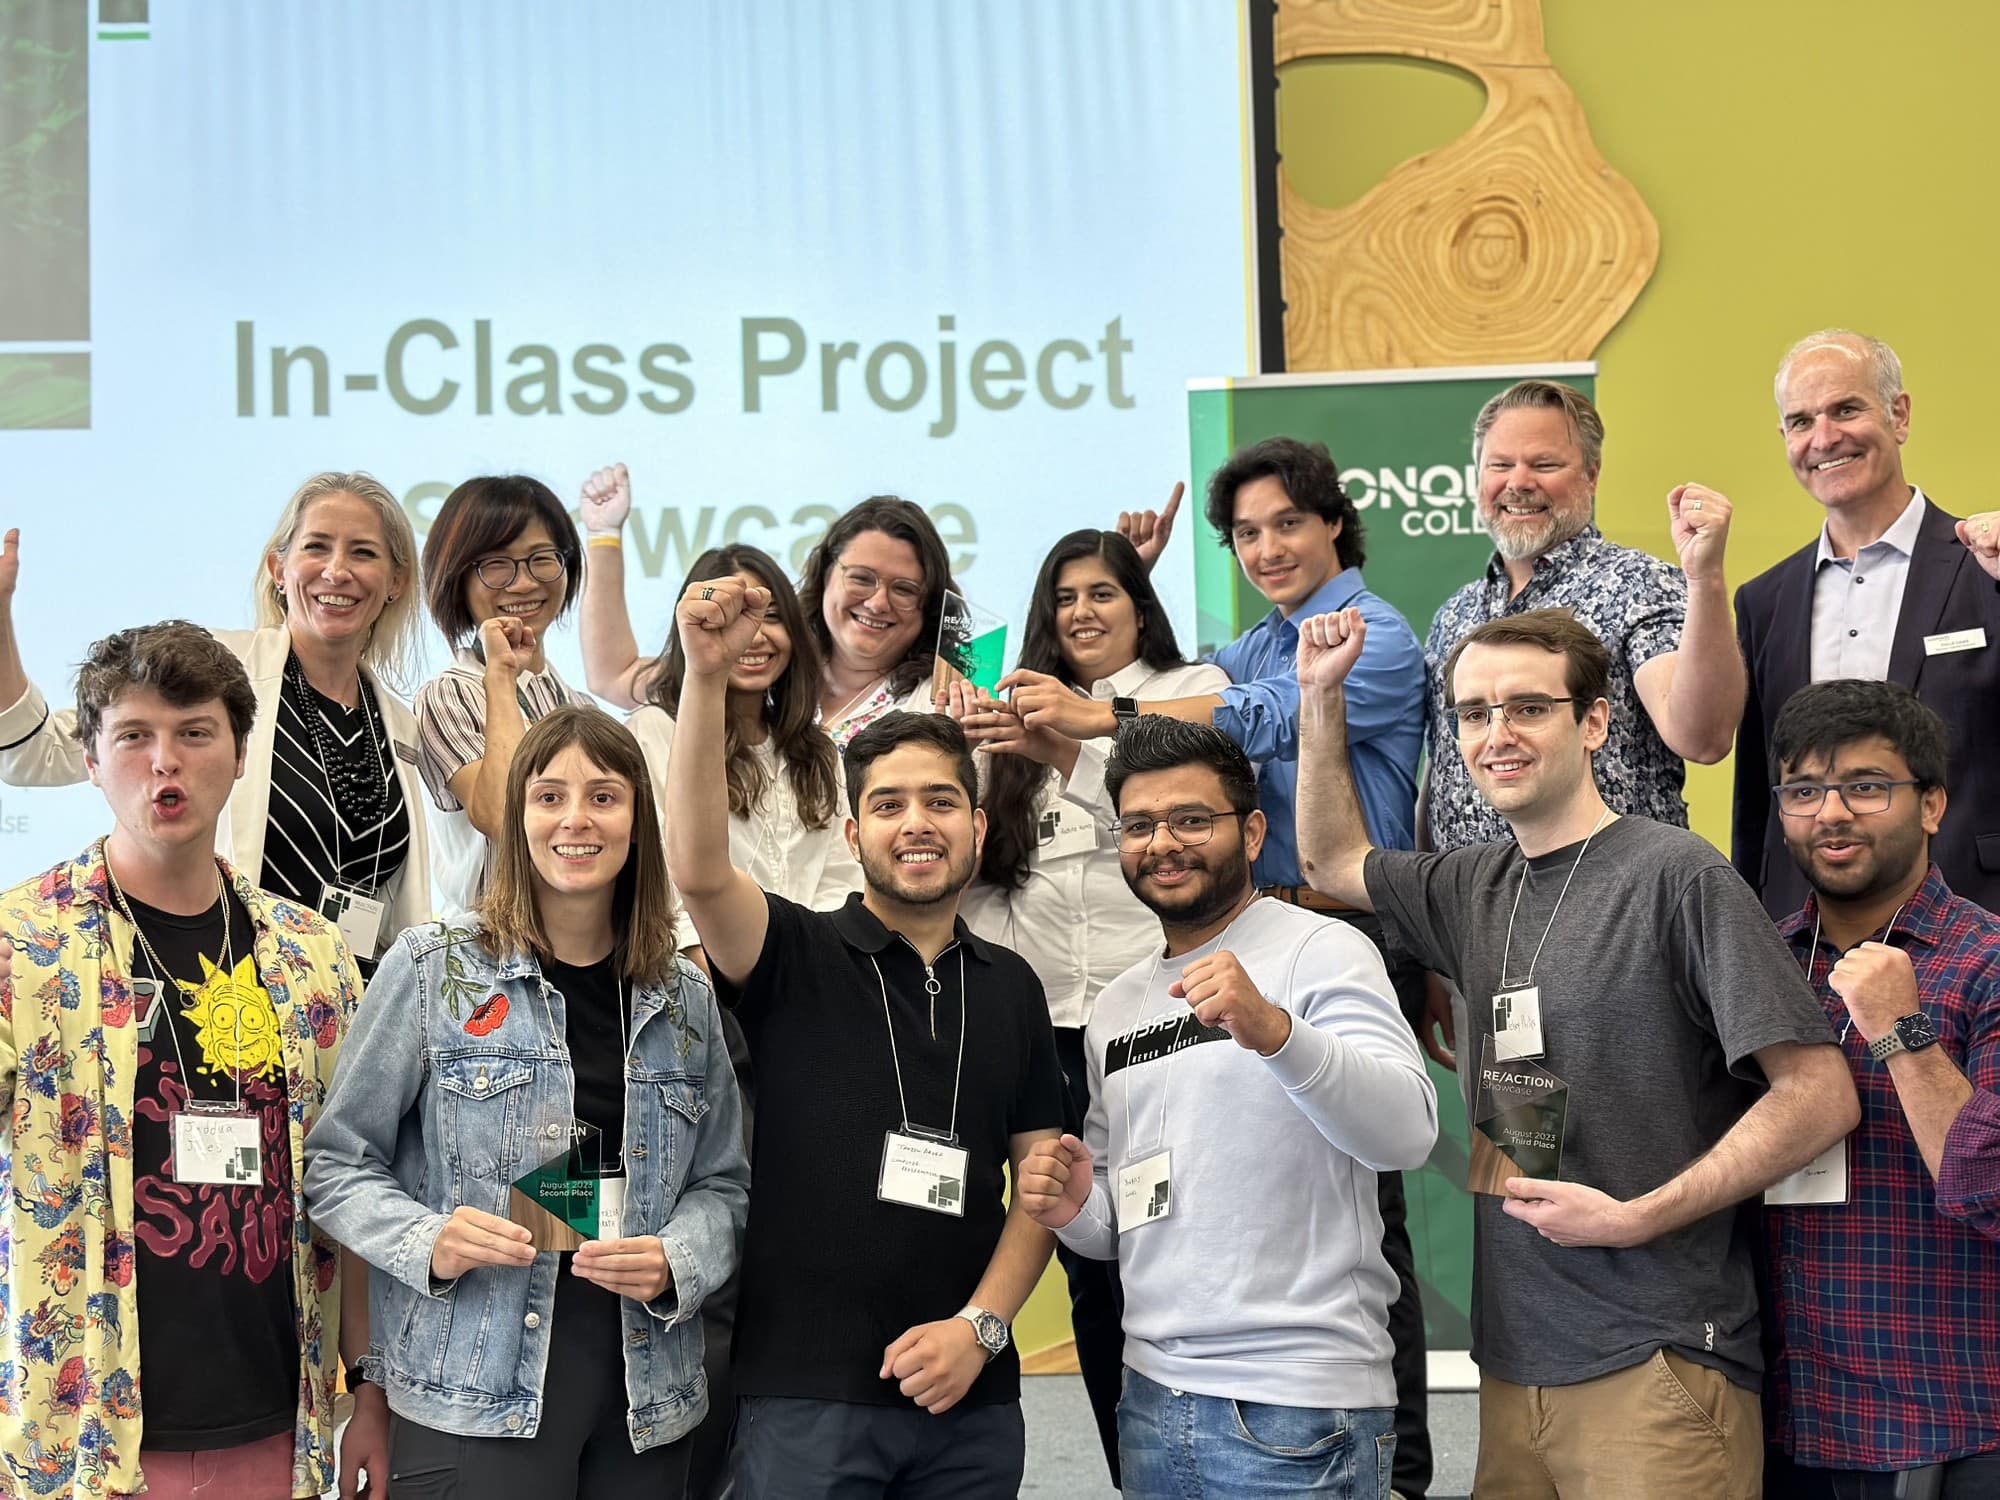 Winners of the In-Class Project Showcase event alongside Kristine Dawson (Associate Vice-President) and Philip Dawe (Director of Applied Research)